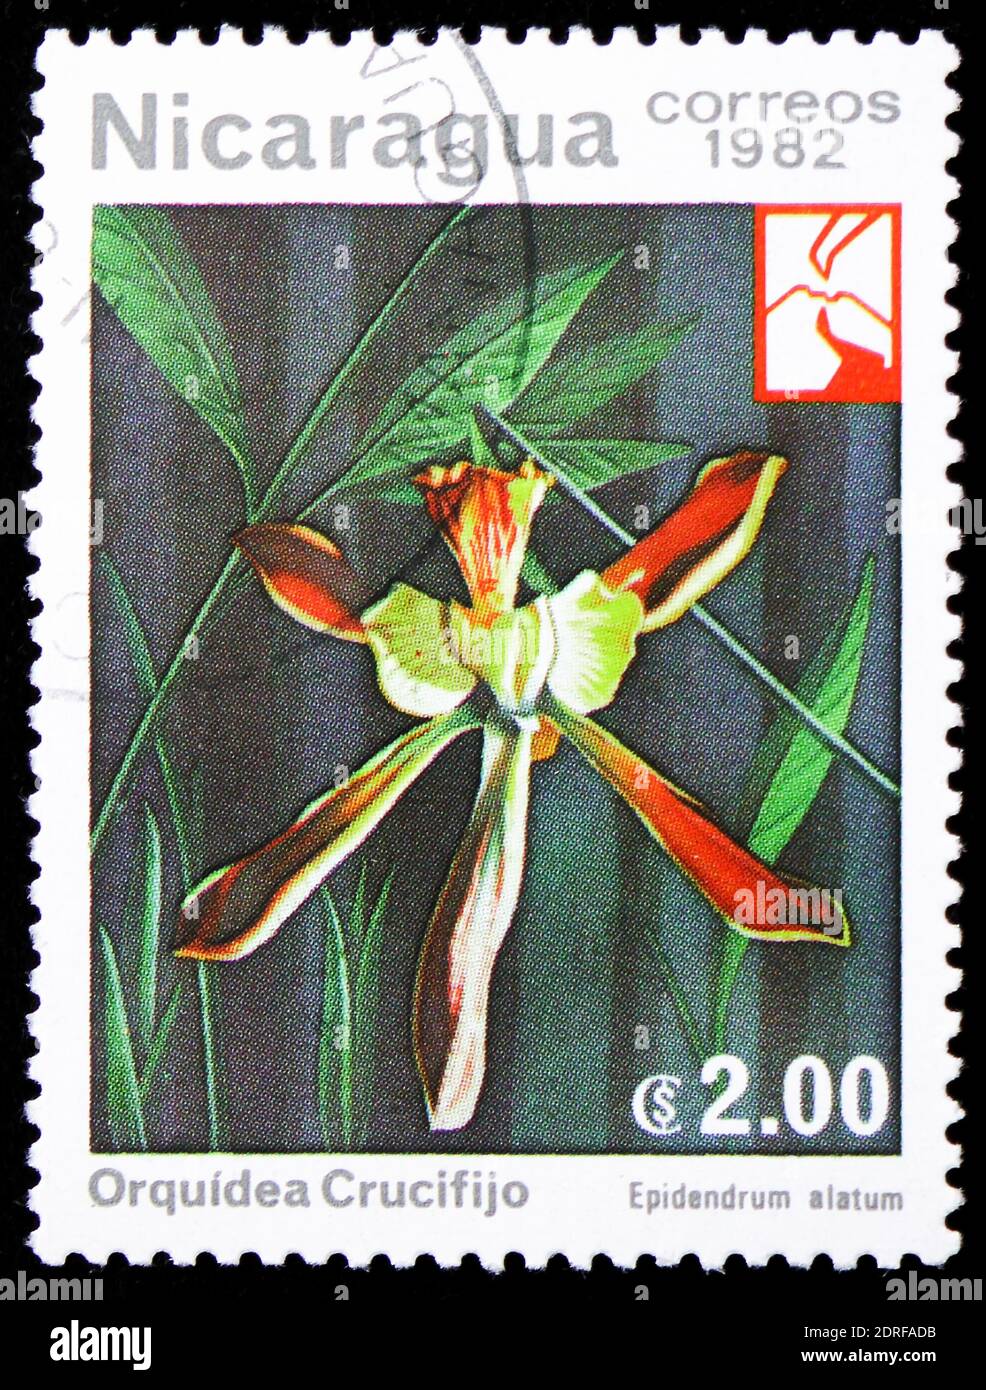 MOSCOW, RUSSIA - JANUARY 4, 2019: A stamp printed in Nicaragua shows Epidendrum alatum - Winged Epidendrum, Flowers serie, circa 1982 Stock Photo